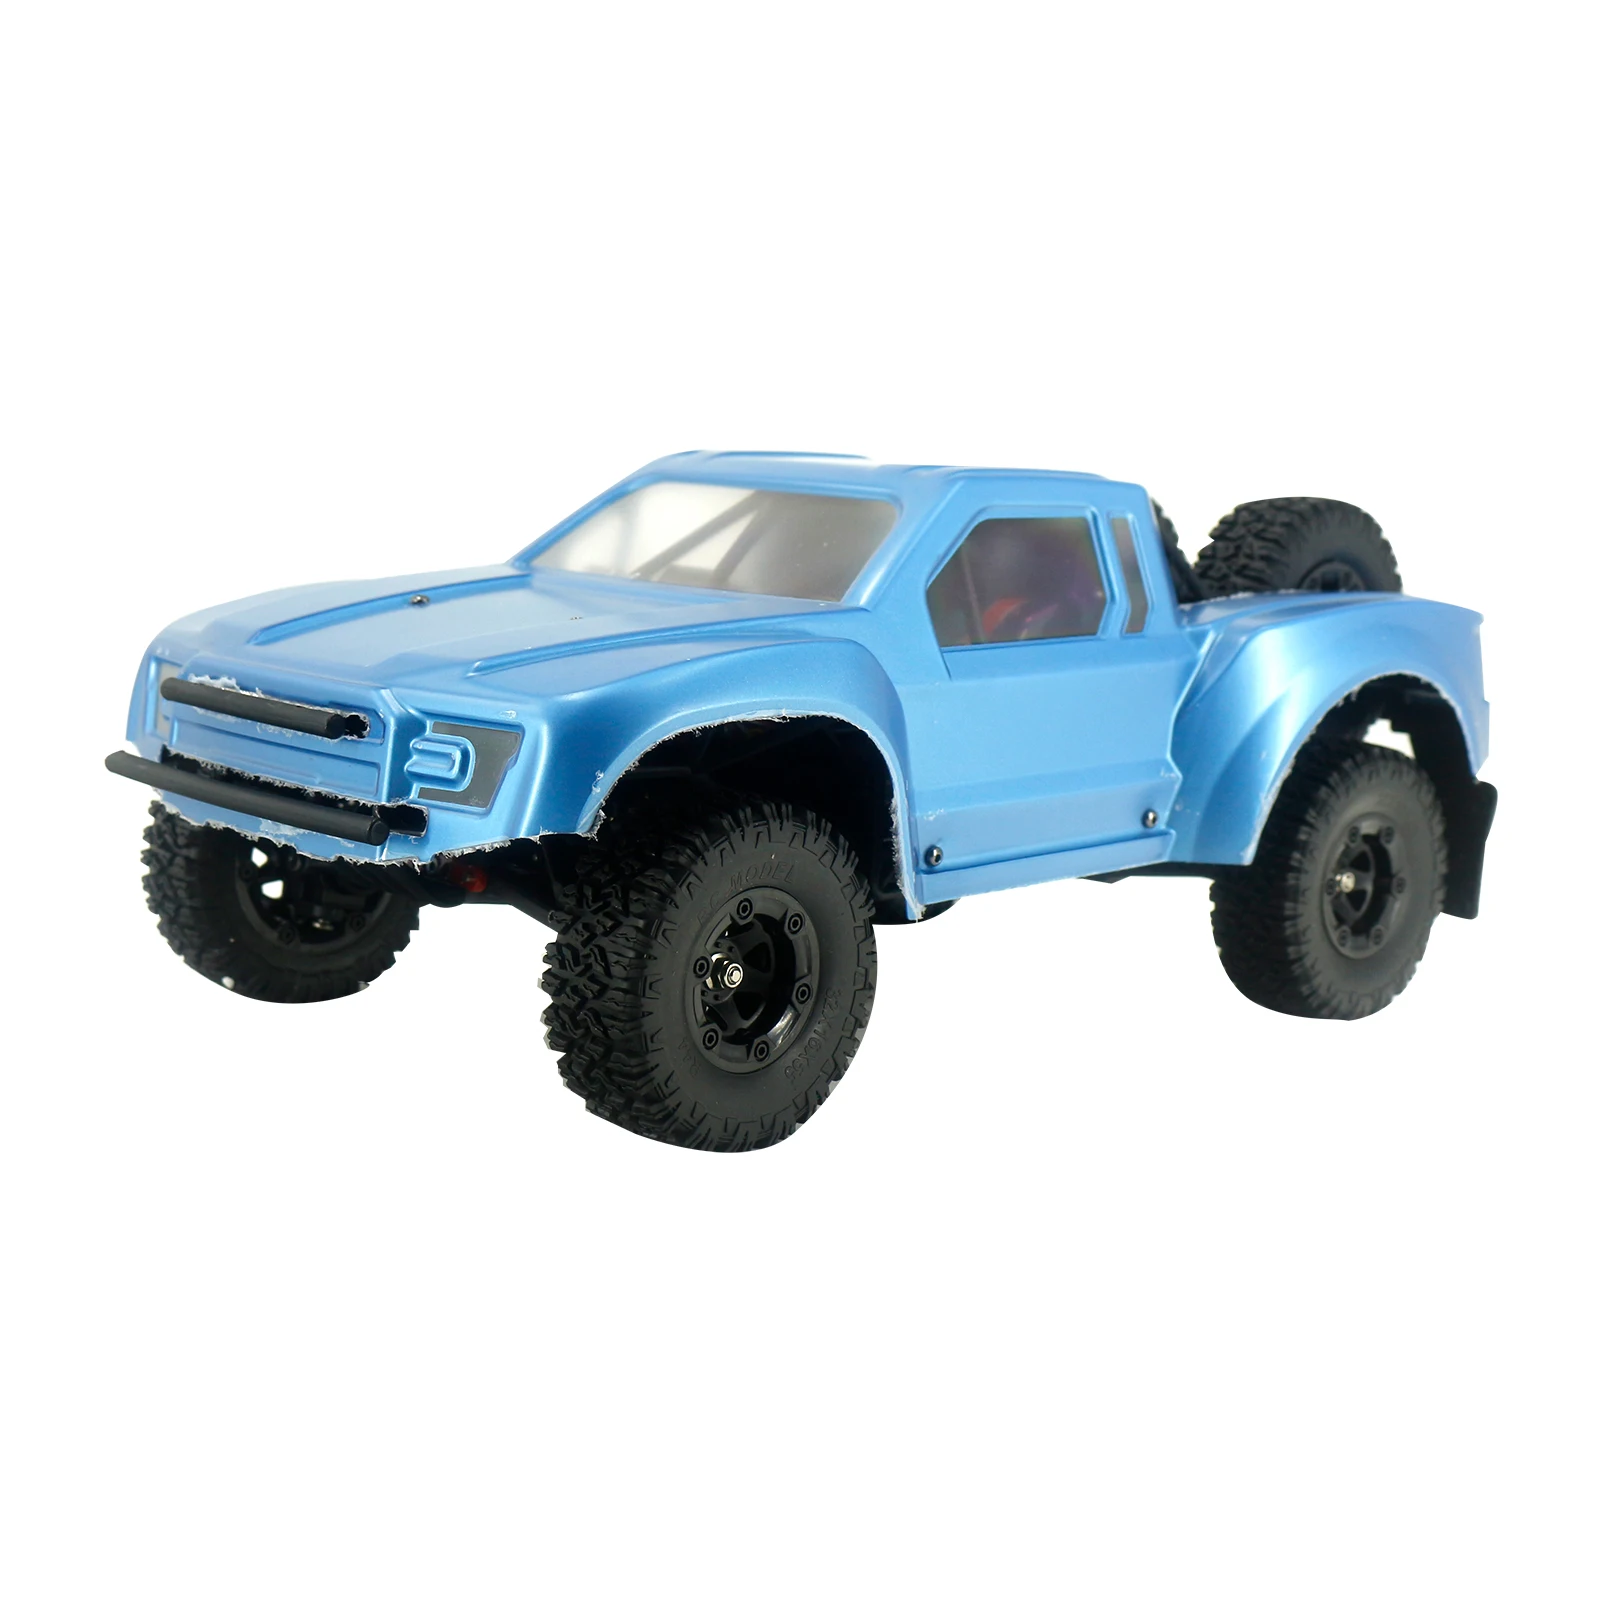 

RC Car 1:12 2.4G Short Course Truck 55km/h High Speed Remote Control Car 4WD RTR with Brushless Motor 2 Battery Toy For Children